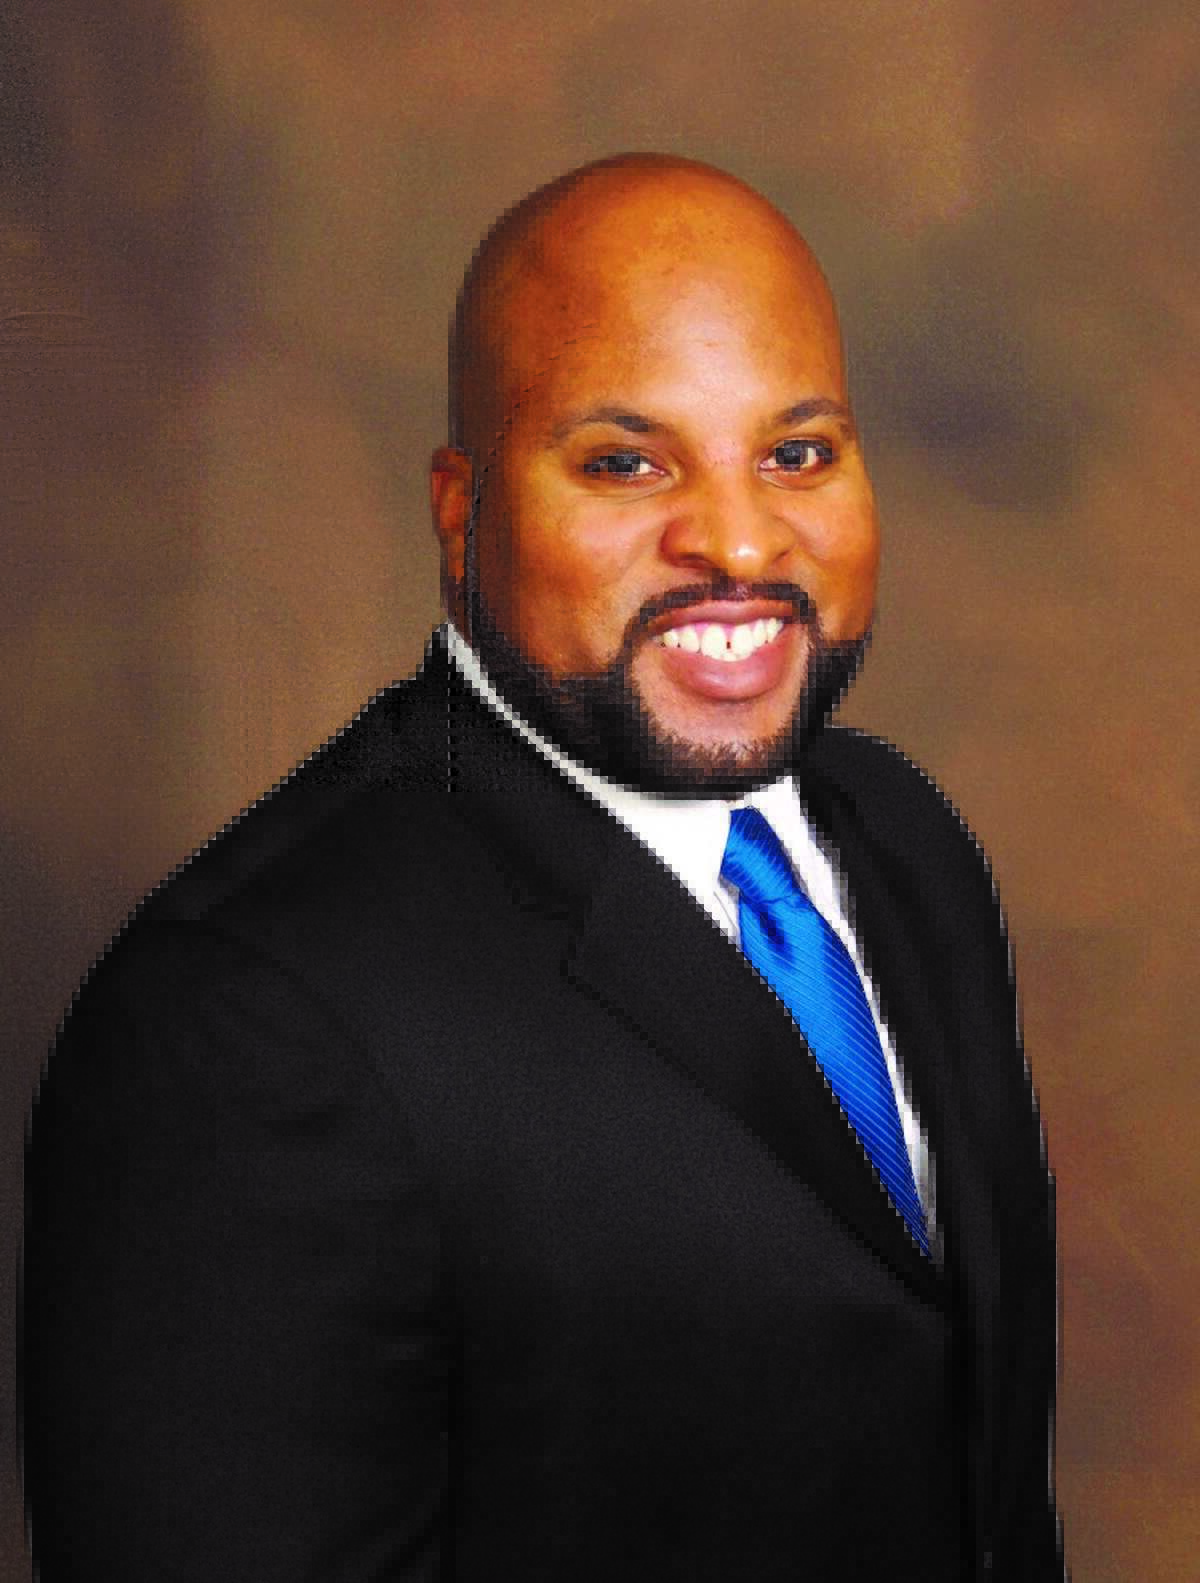 Markeith Spears has been named manager of the Pearland of the Pearland office of Better Homes and Garden Real Estate Gary Greene.